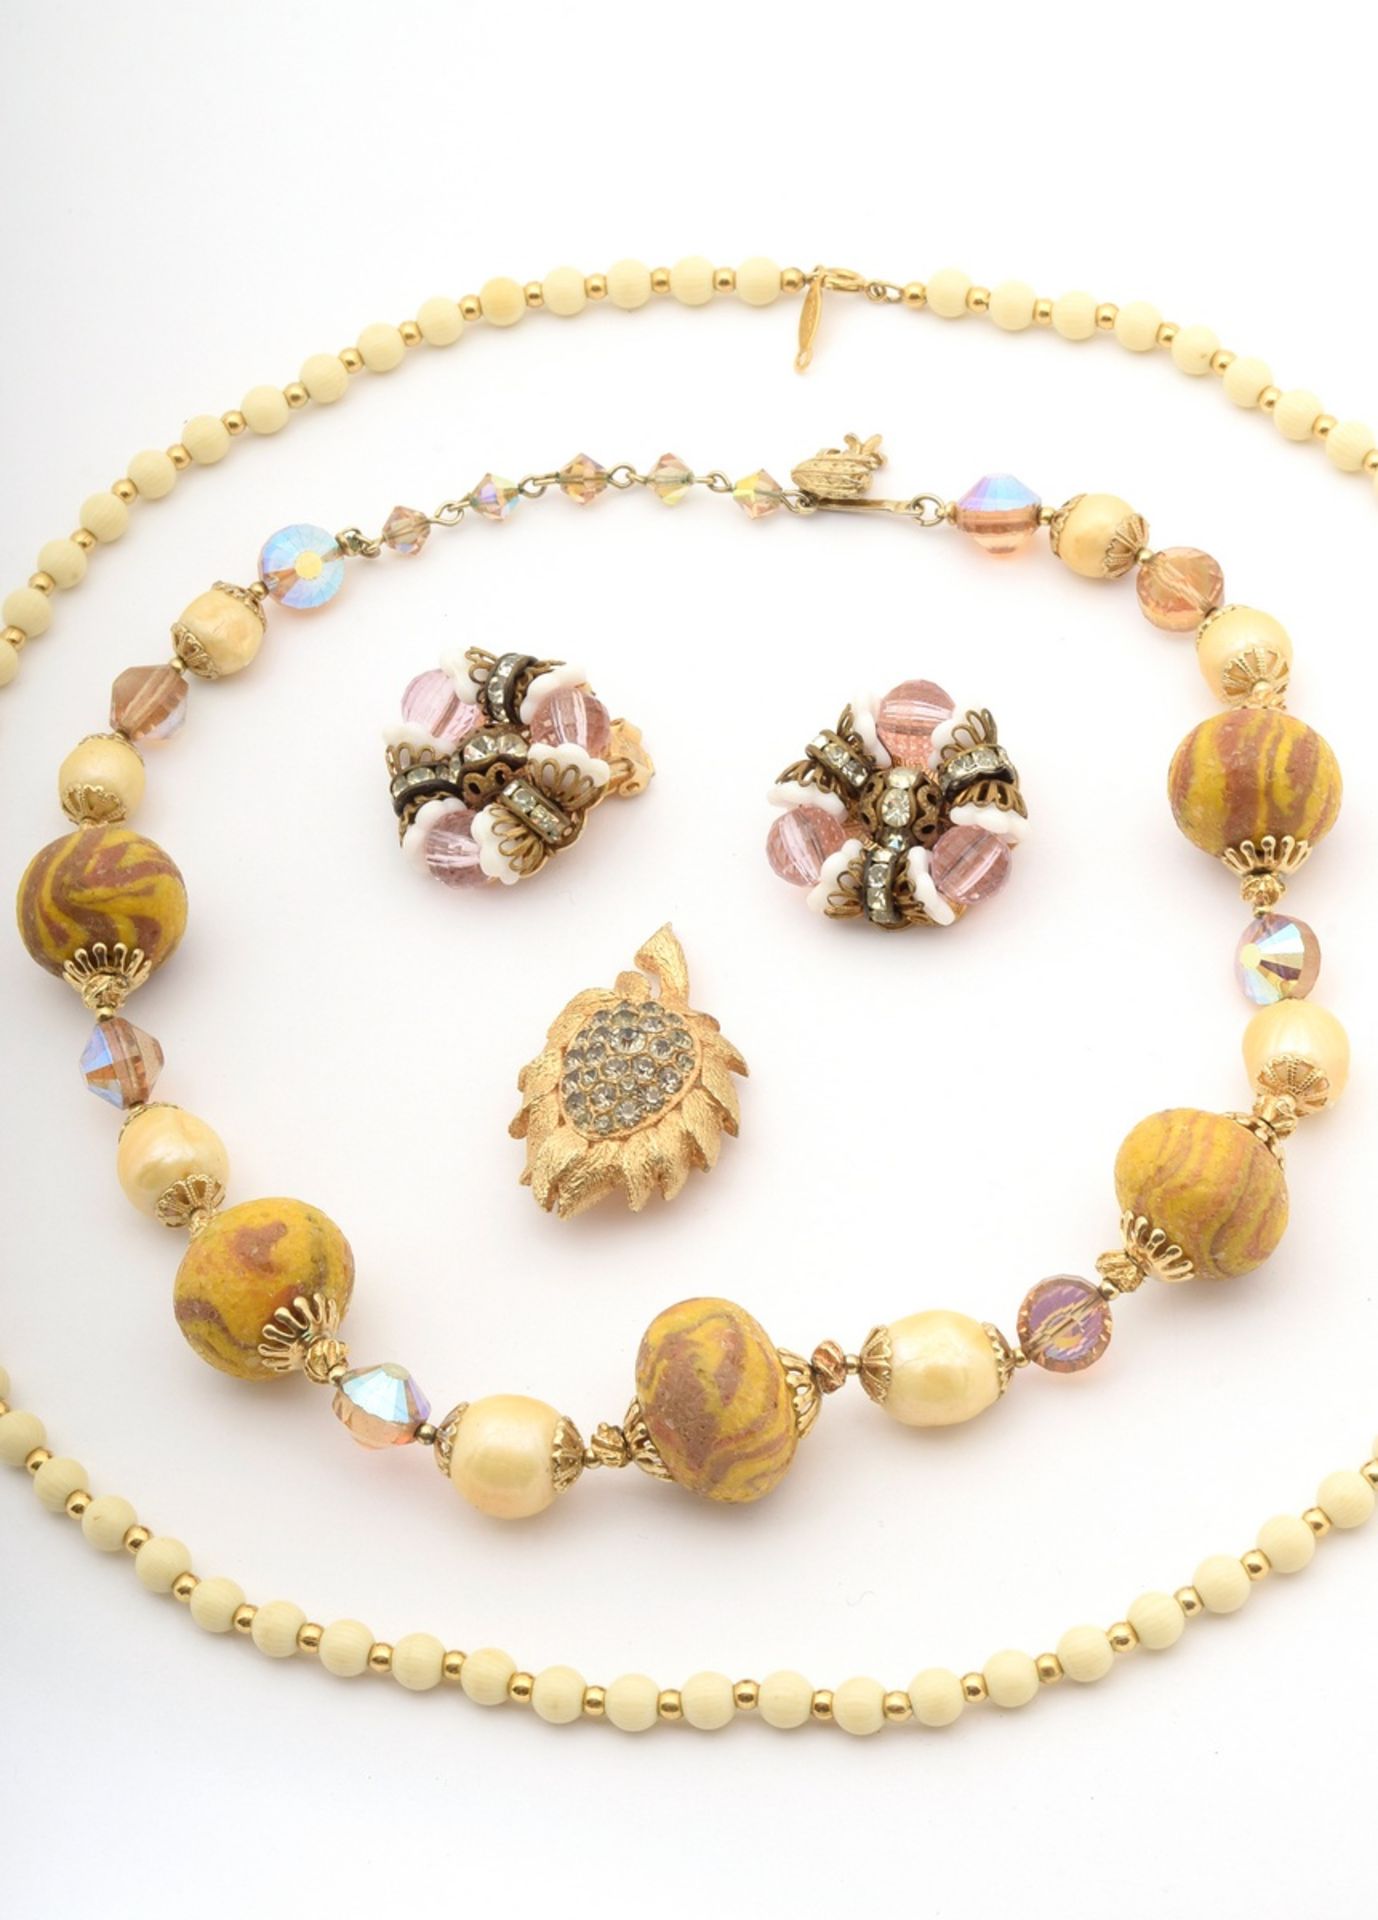 5 pieces of gold-plated costume jewellery with artificial pearls, glass beads and rhinestones: 1x n